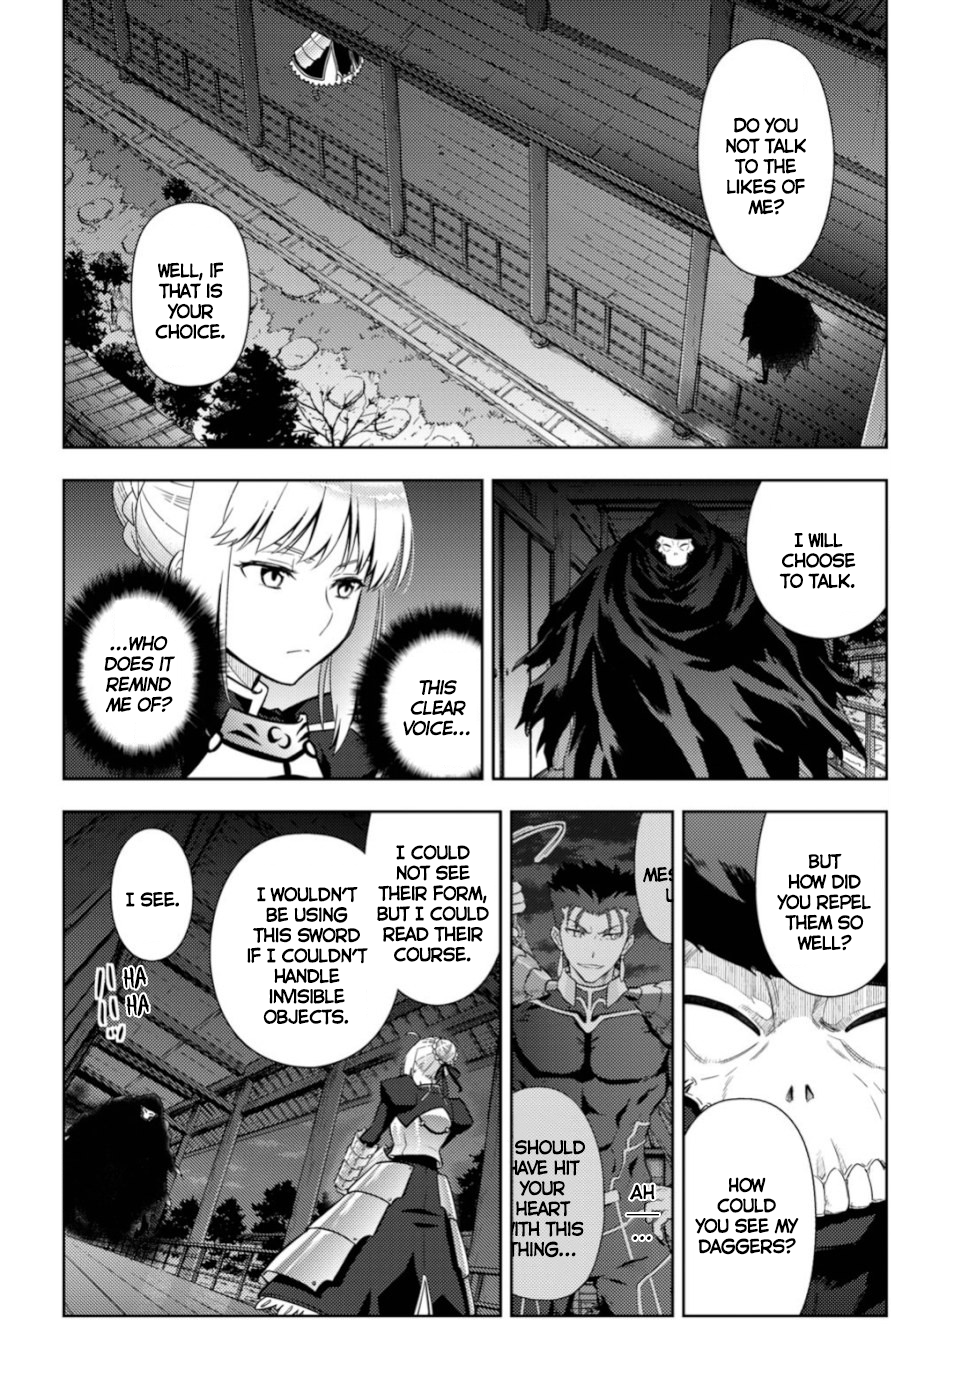 Fate/stay Night - Heaven's Feel Vol.8 Chapter 54: Day 8 / The Last Swordsman (2) - Picture 2